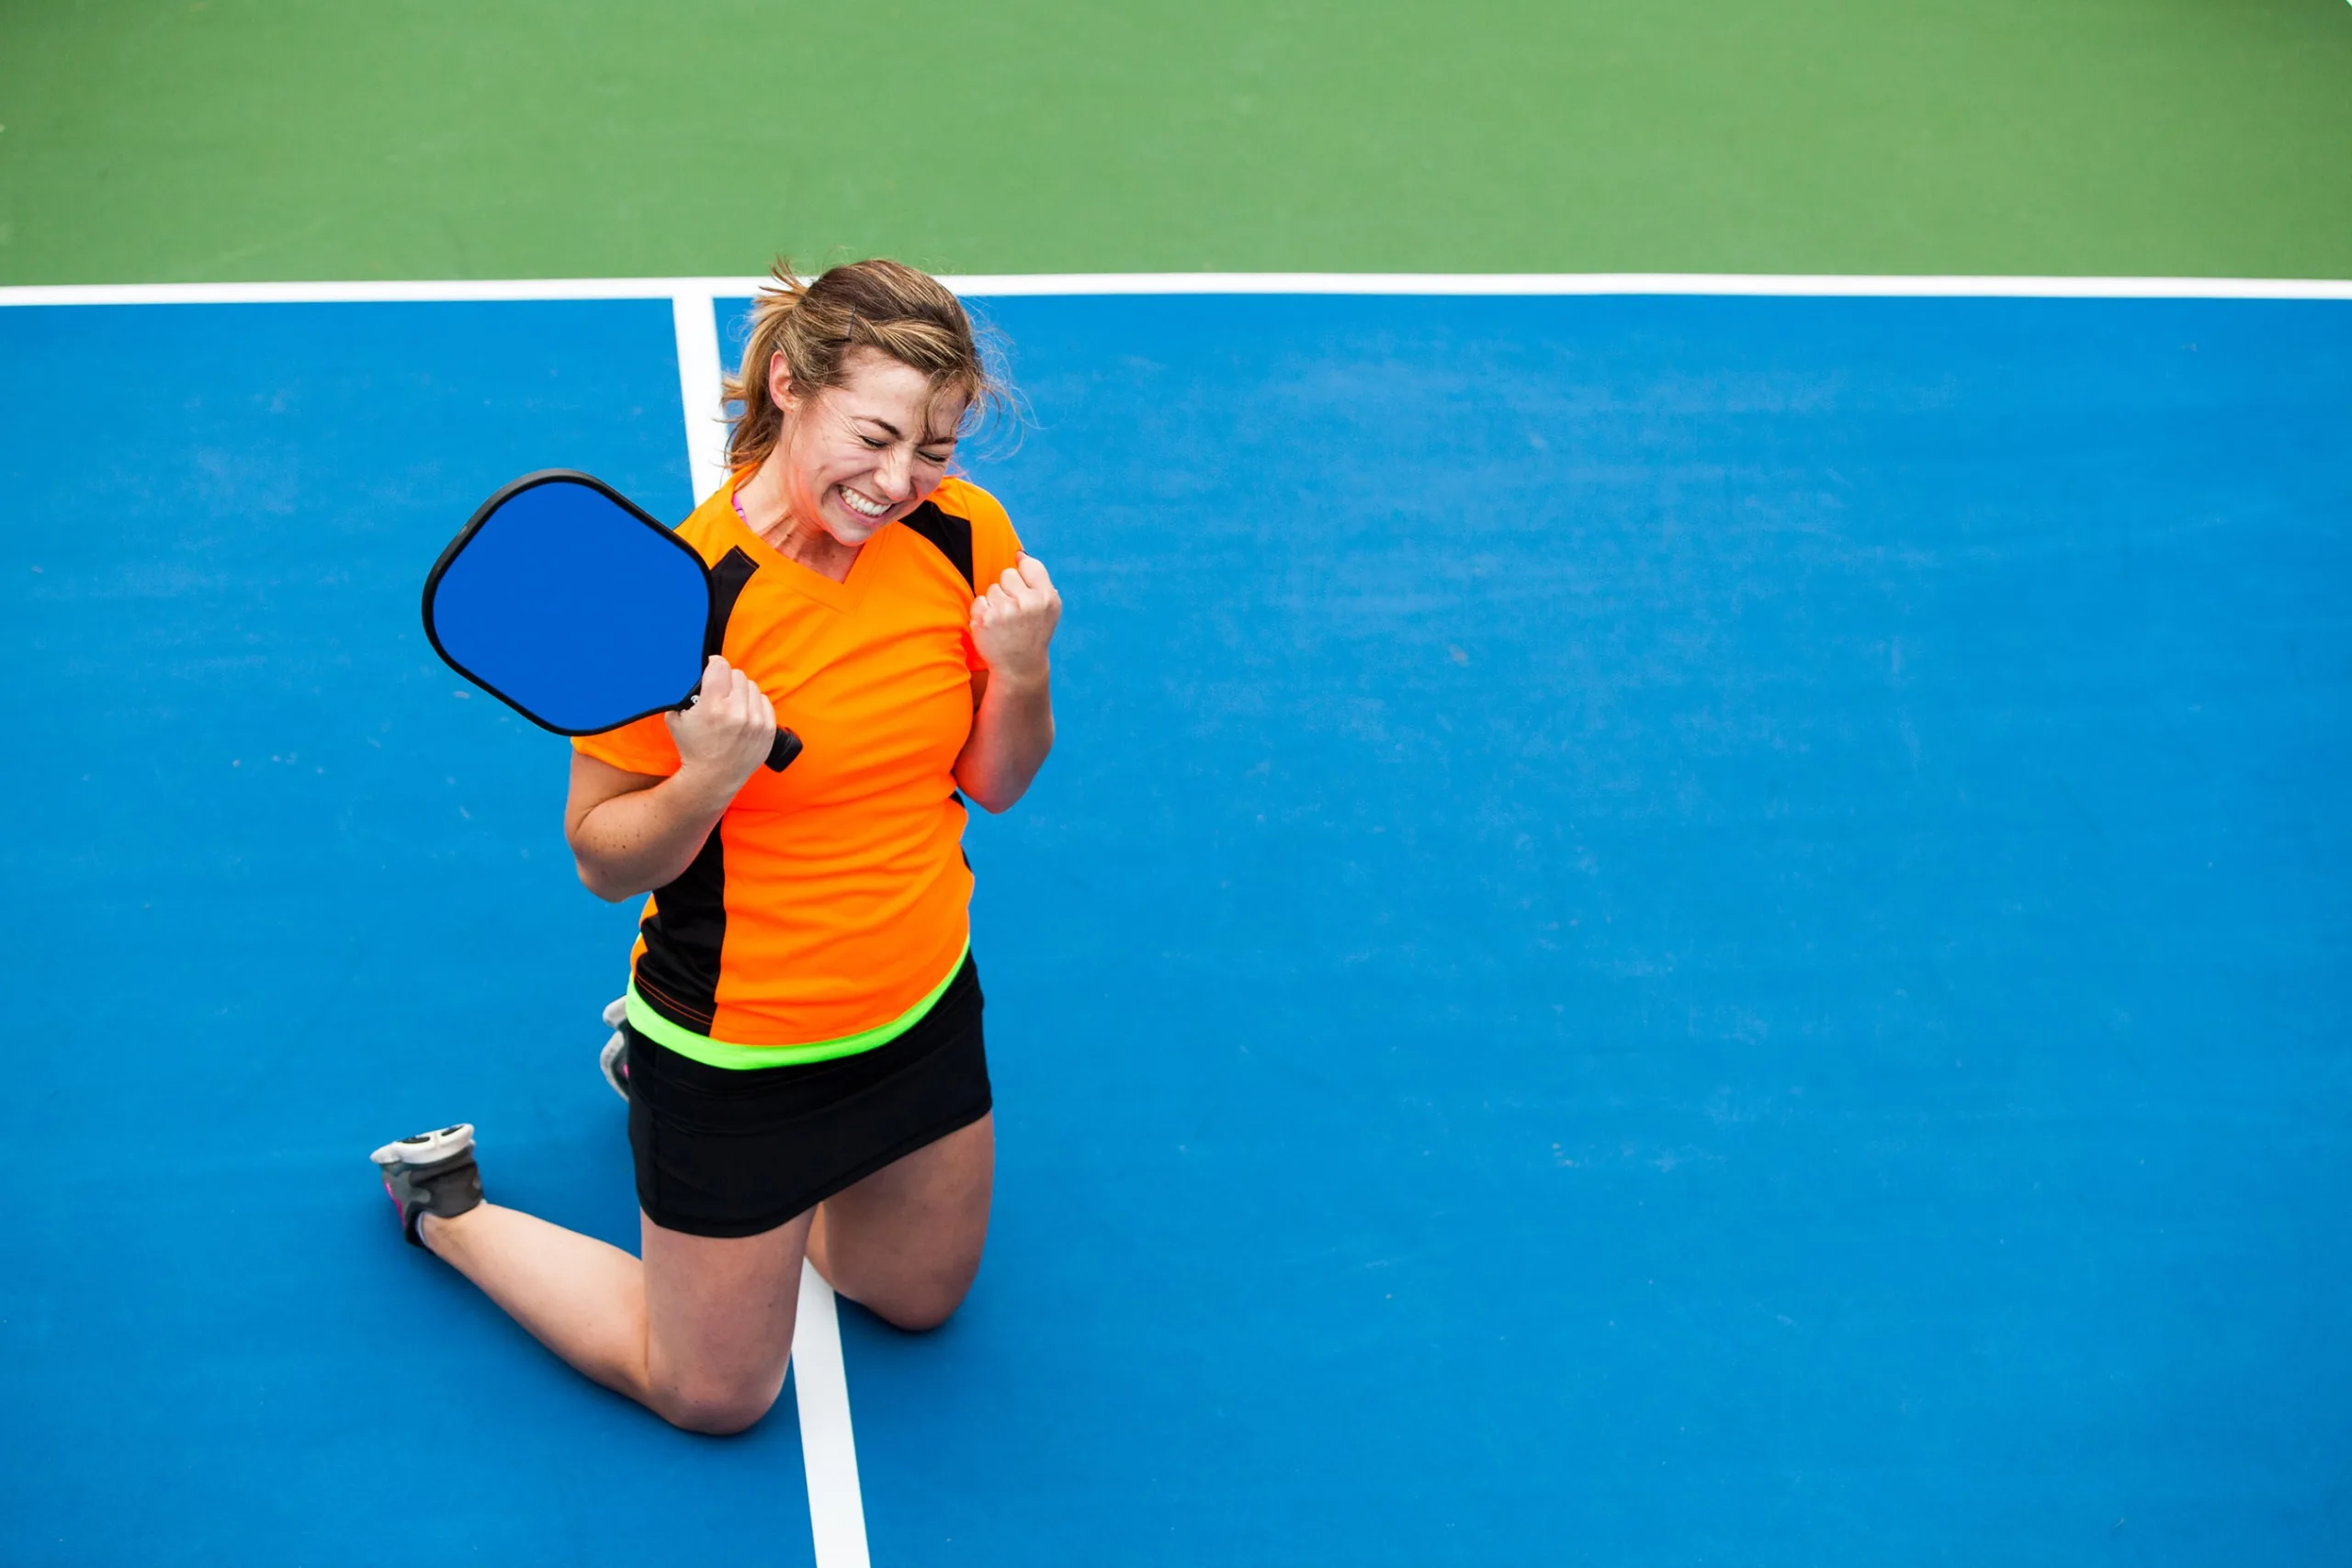 Girl wincing in victorious pose on her knees on a pickleball court after winning pickleball tournament. she has her racket in one hand and her other is a fist held closely to her. She is wearing an orange and black athletic tee and tennis skirt and sneakers.